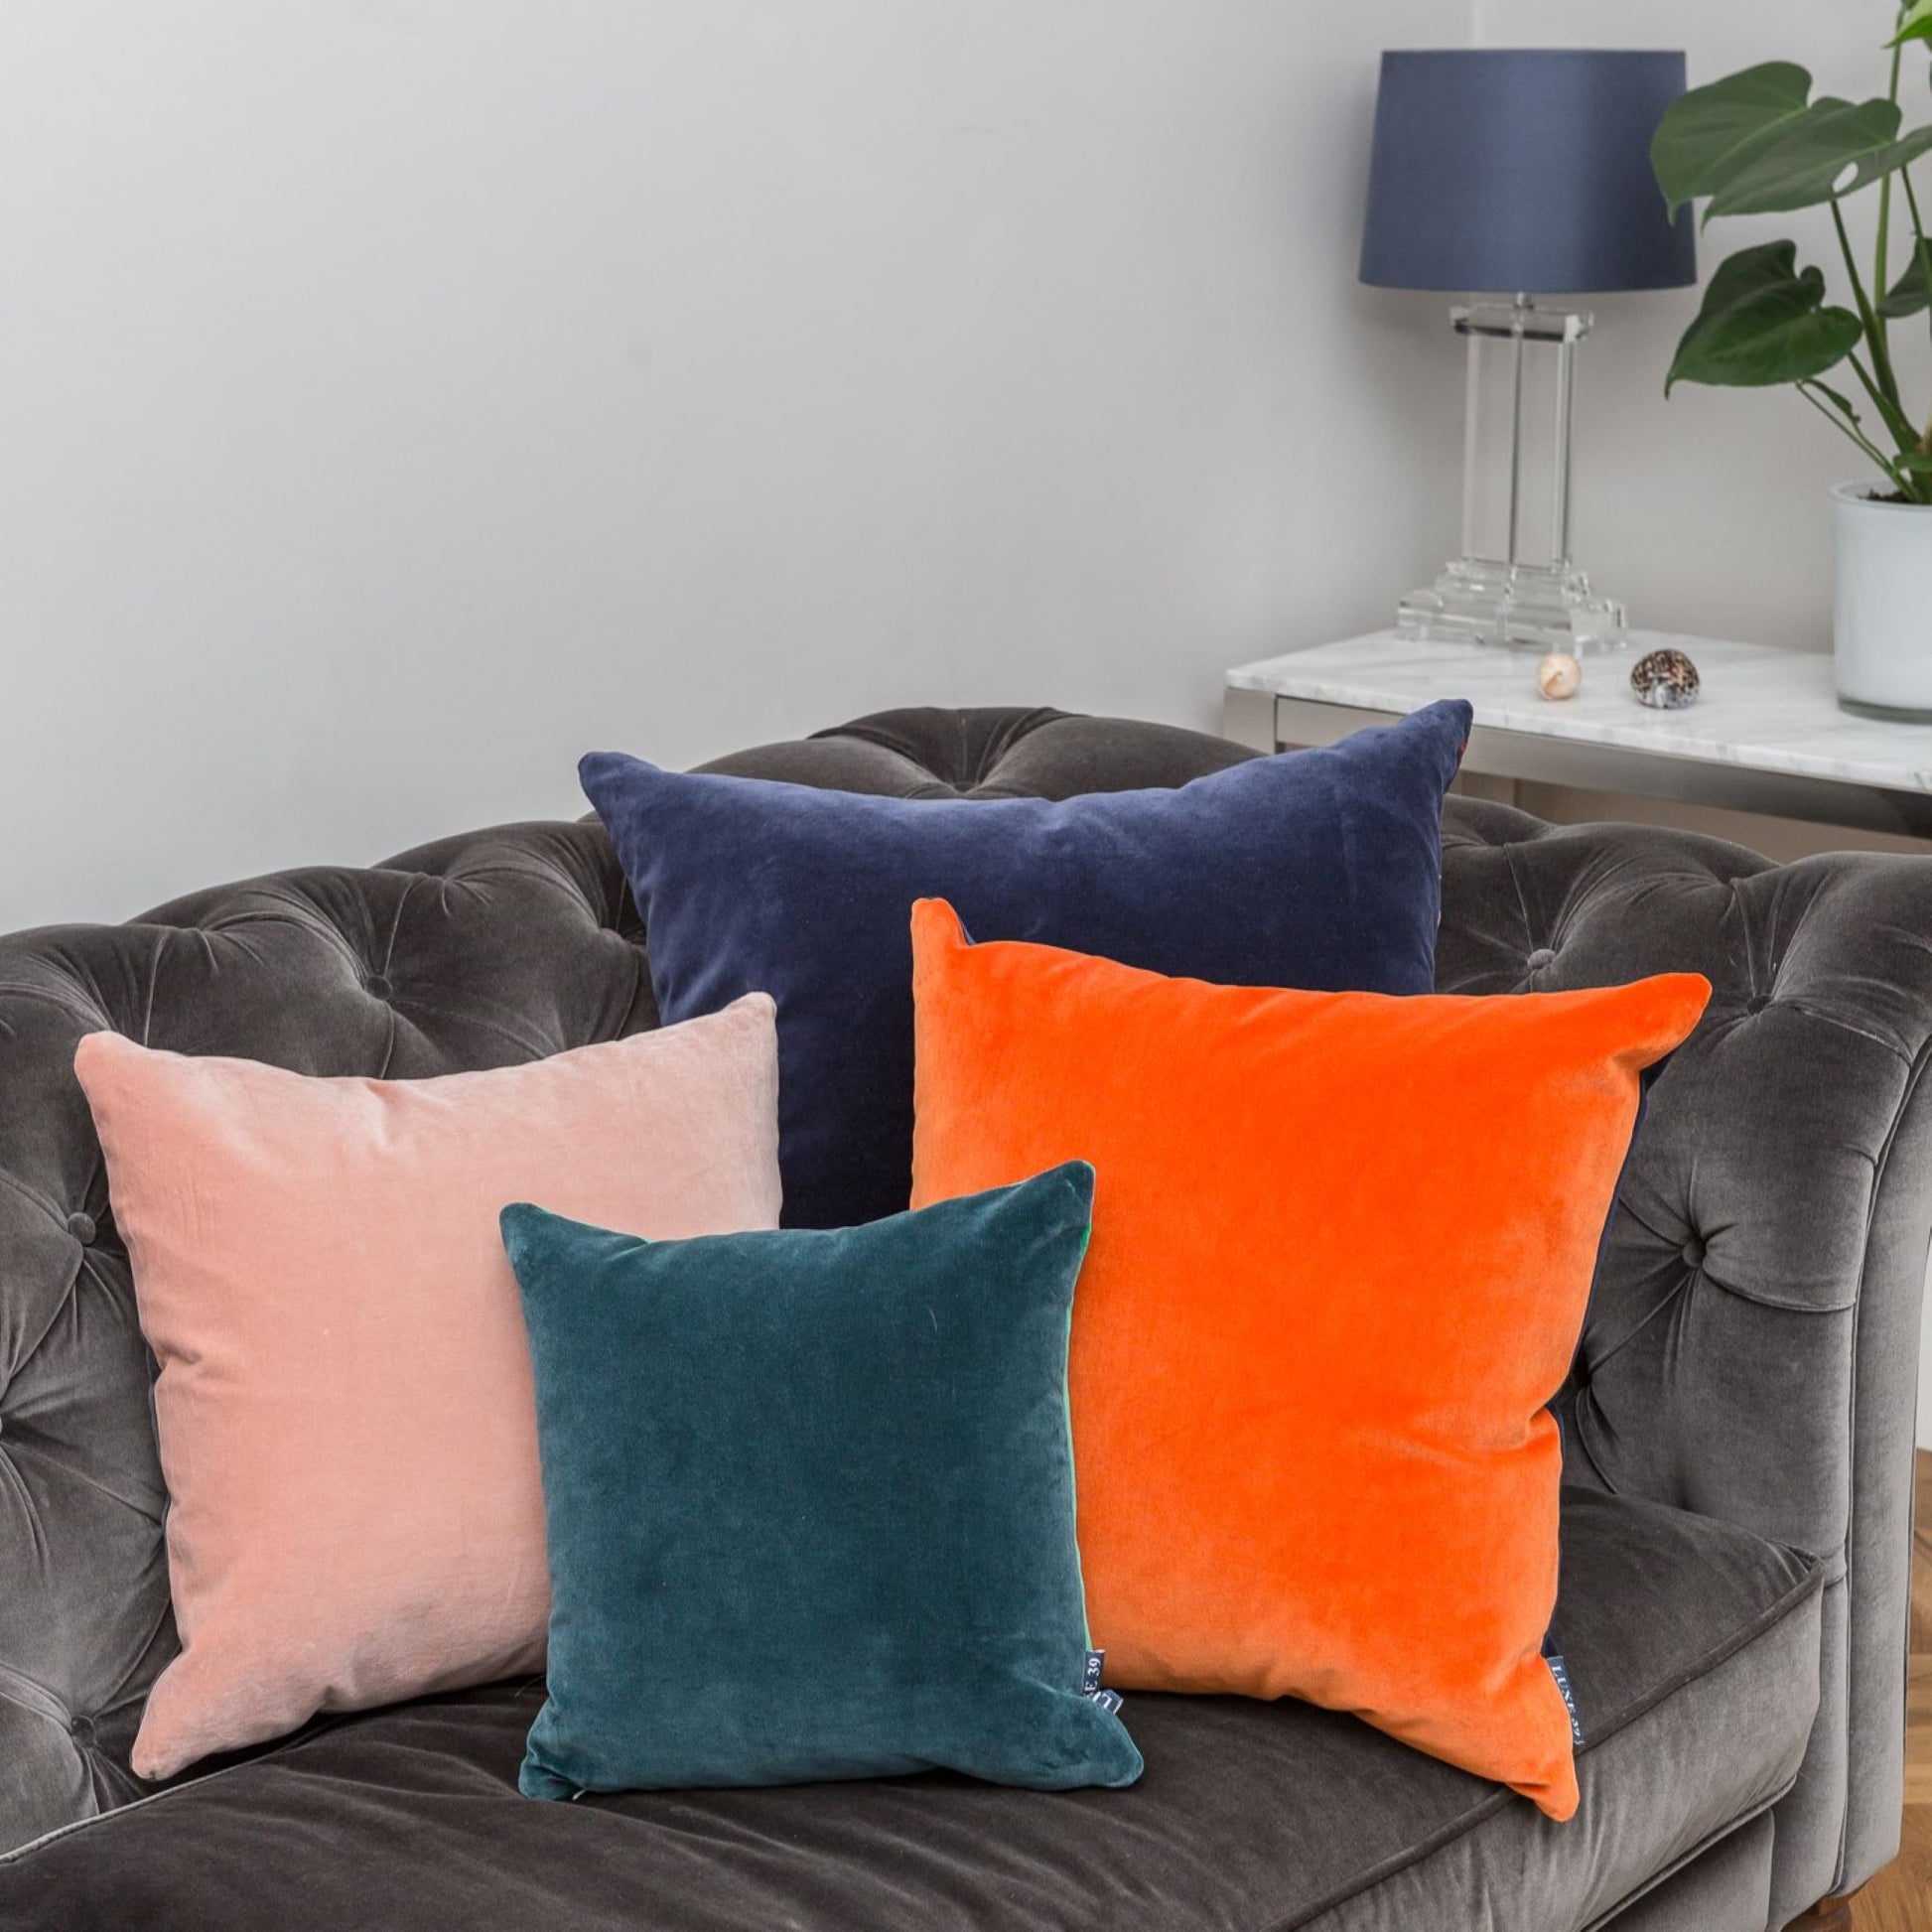 pink fluffy cushions with teal, orange and navy cushions